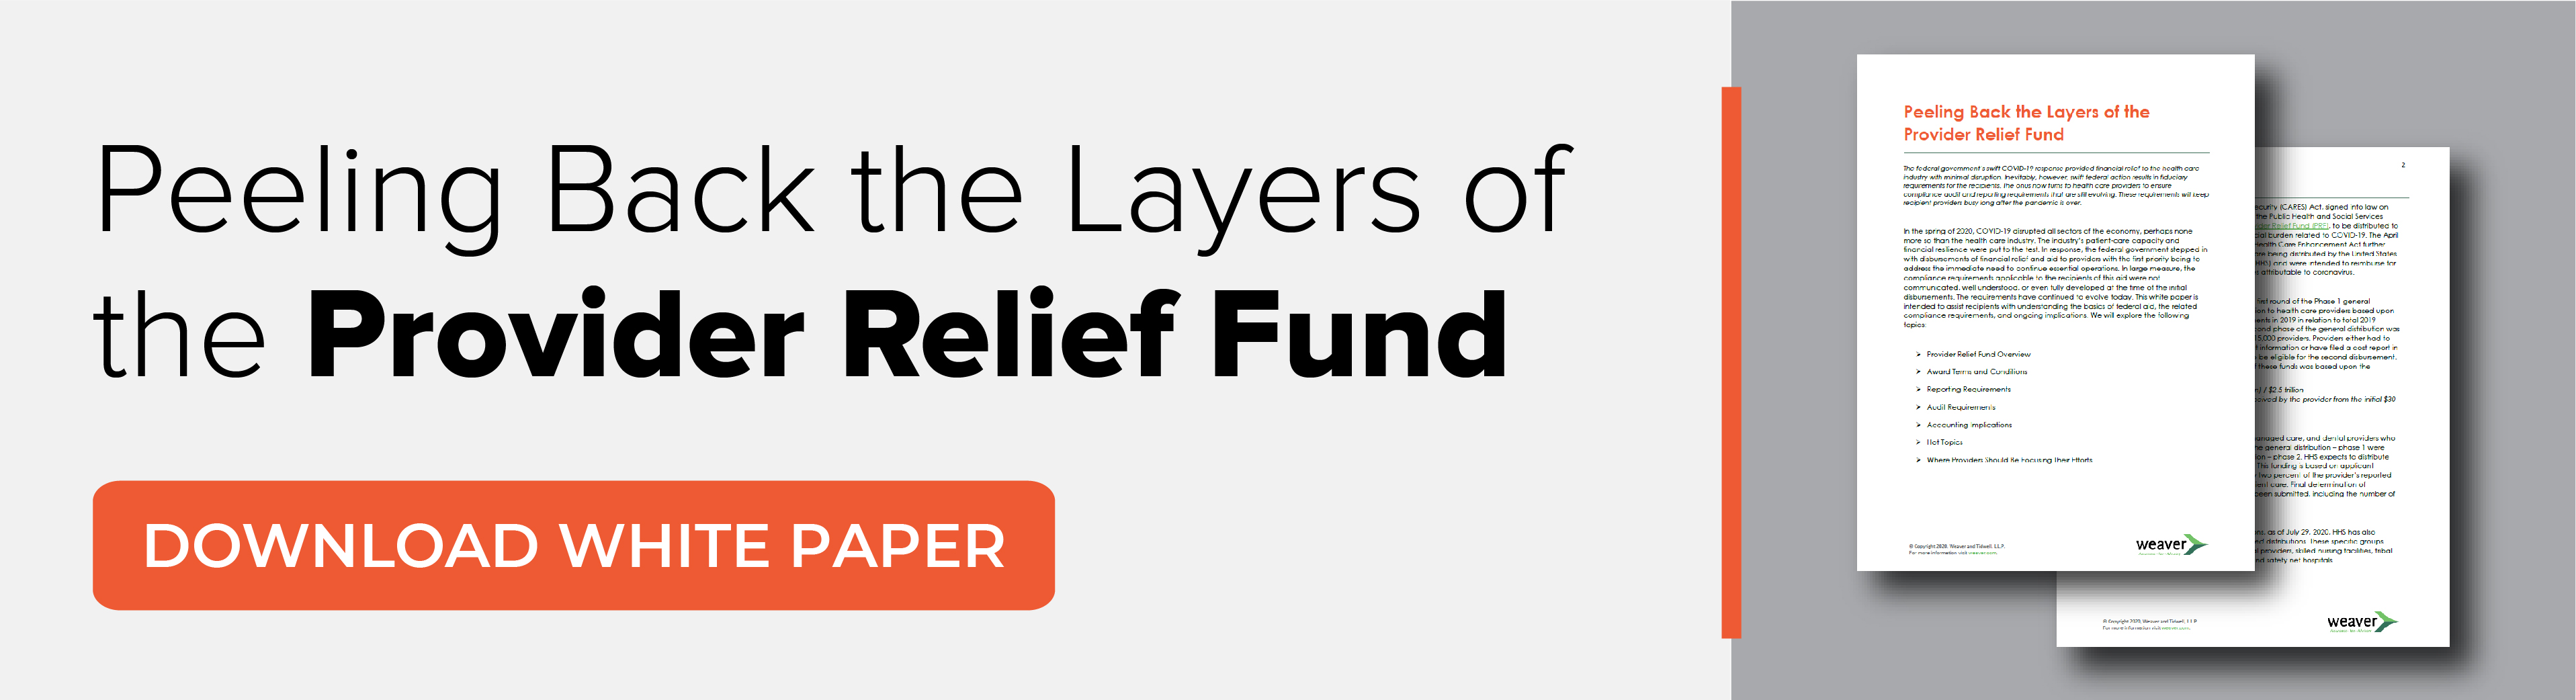 Provider Relief Fund White Paper with Download Button